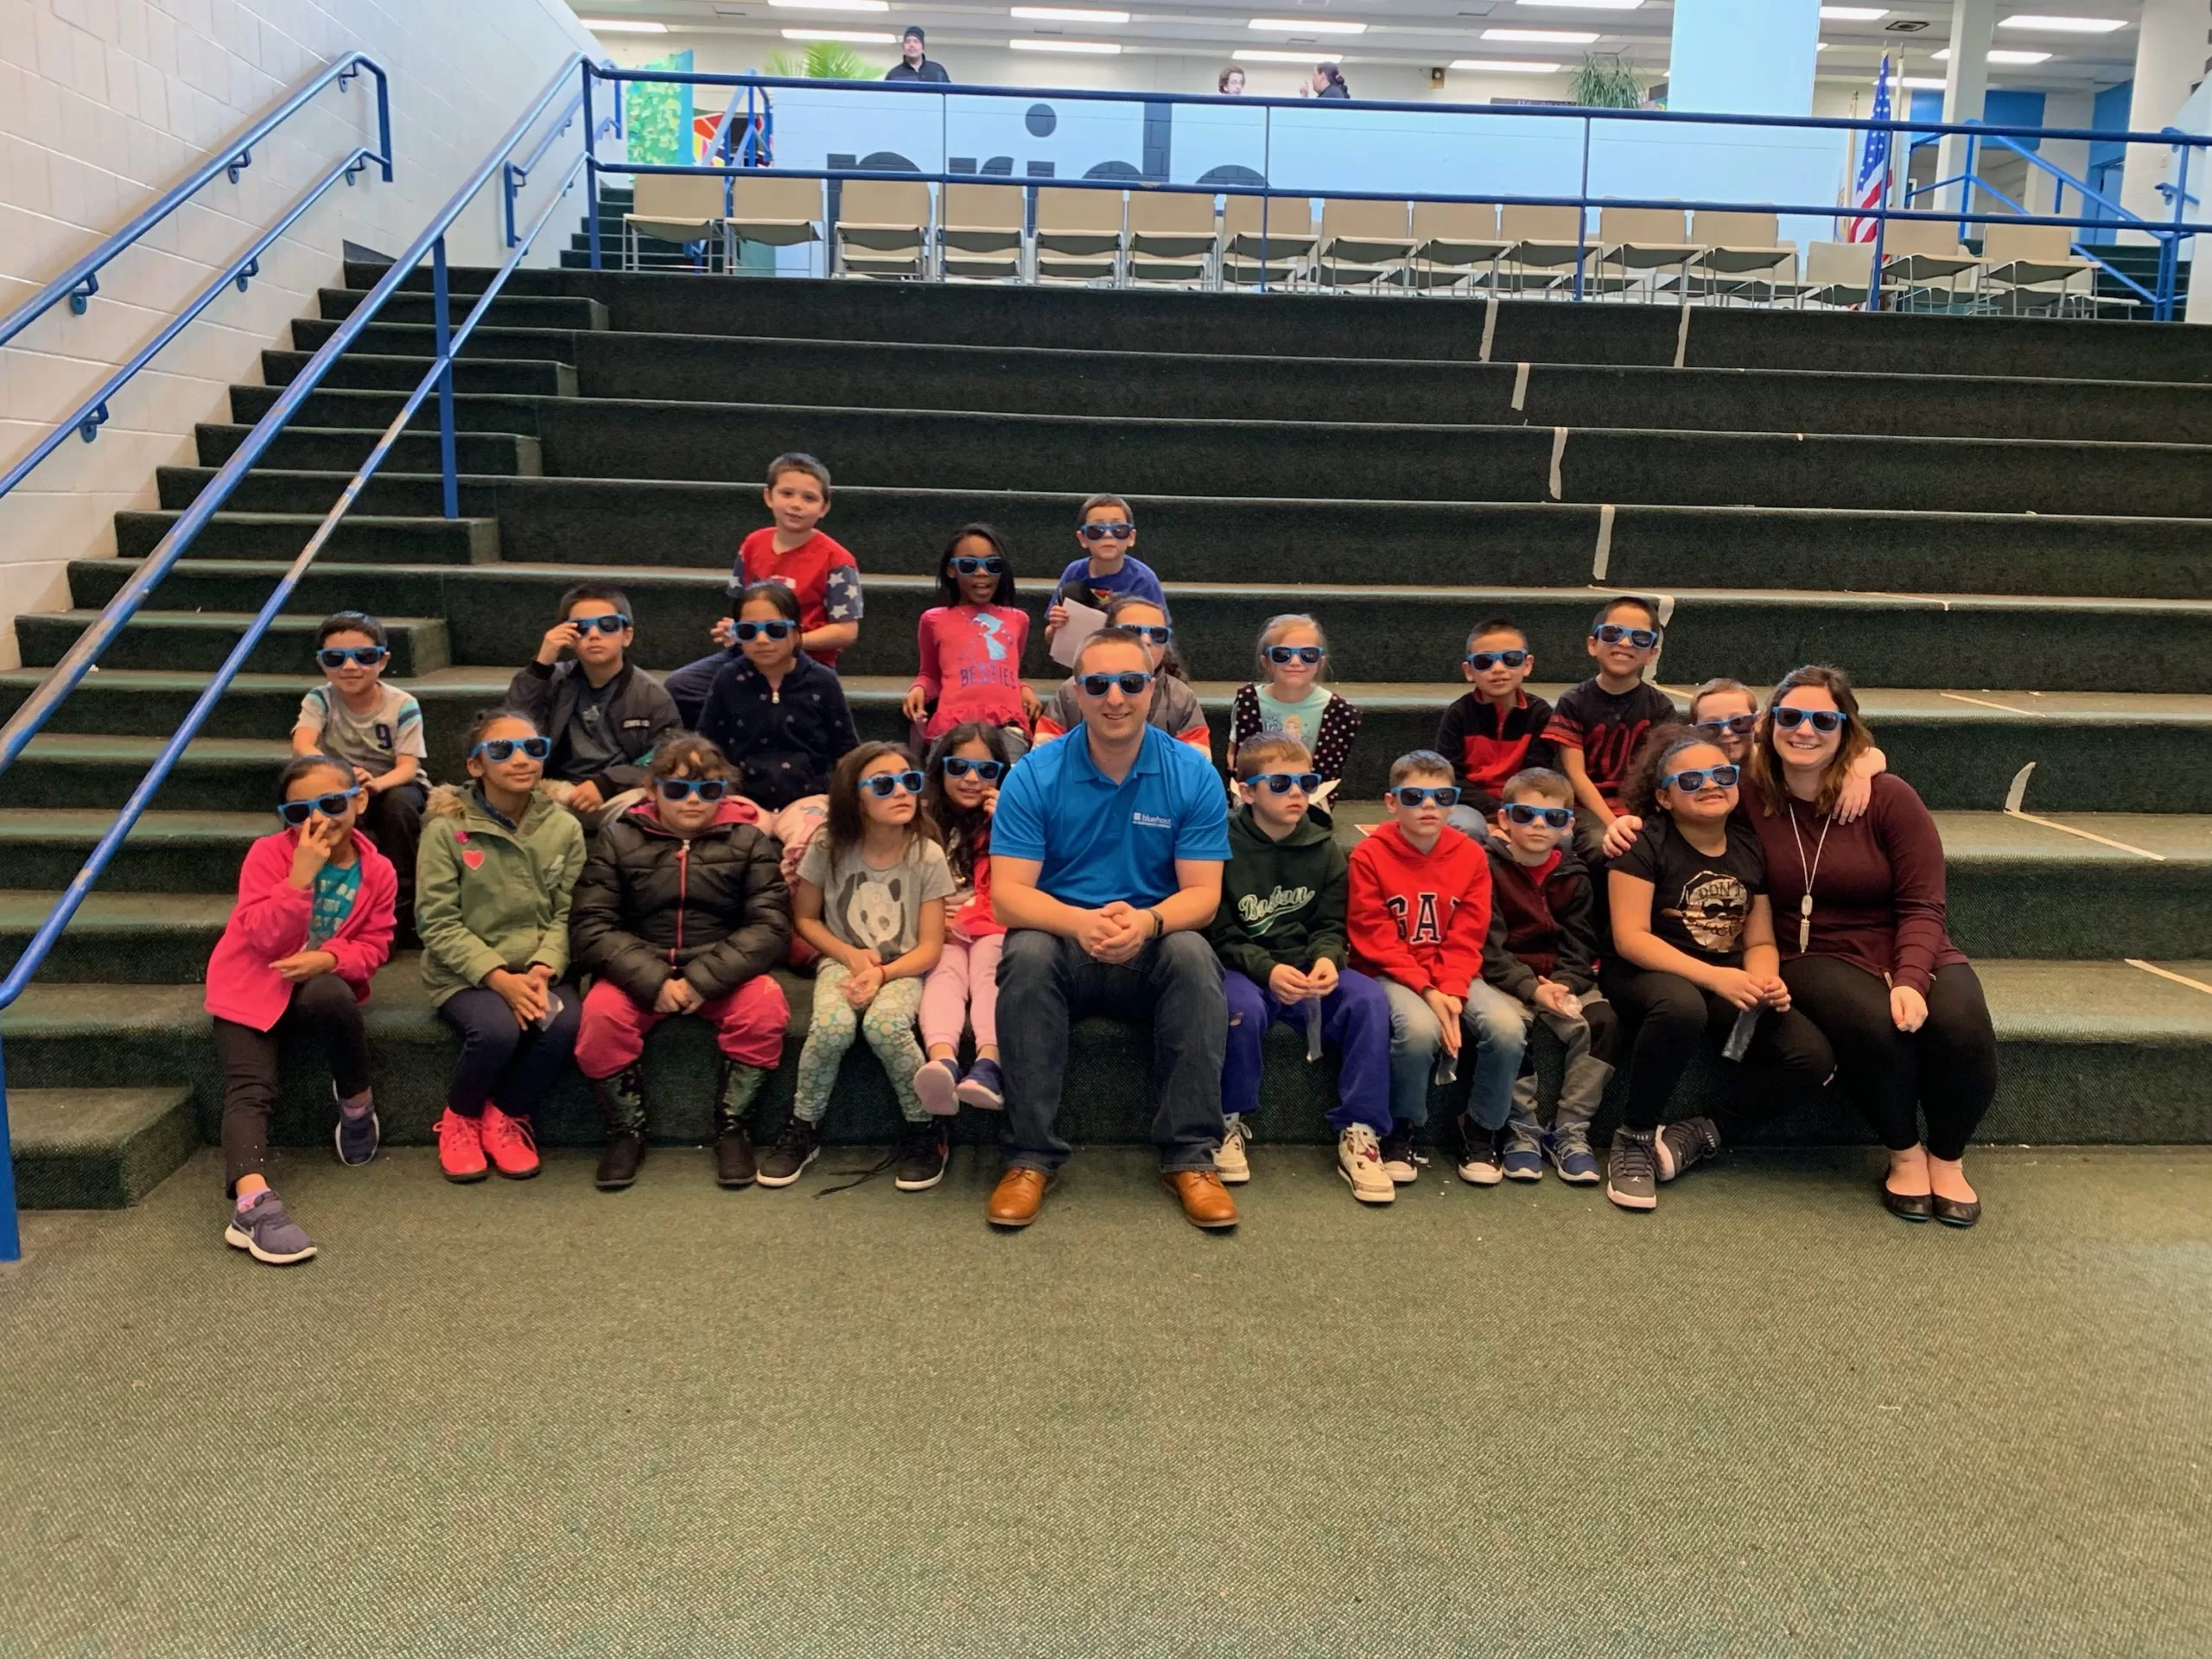 A group of kids, a teacher, and Jonathan sitting on steps all wearing Bluehost sunglasses.